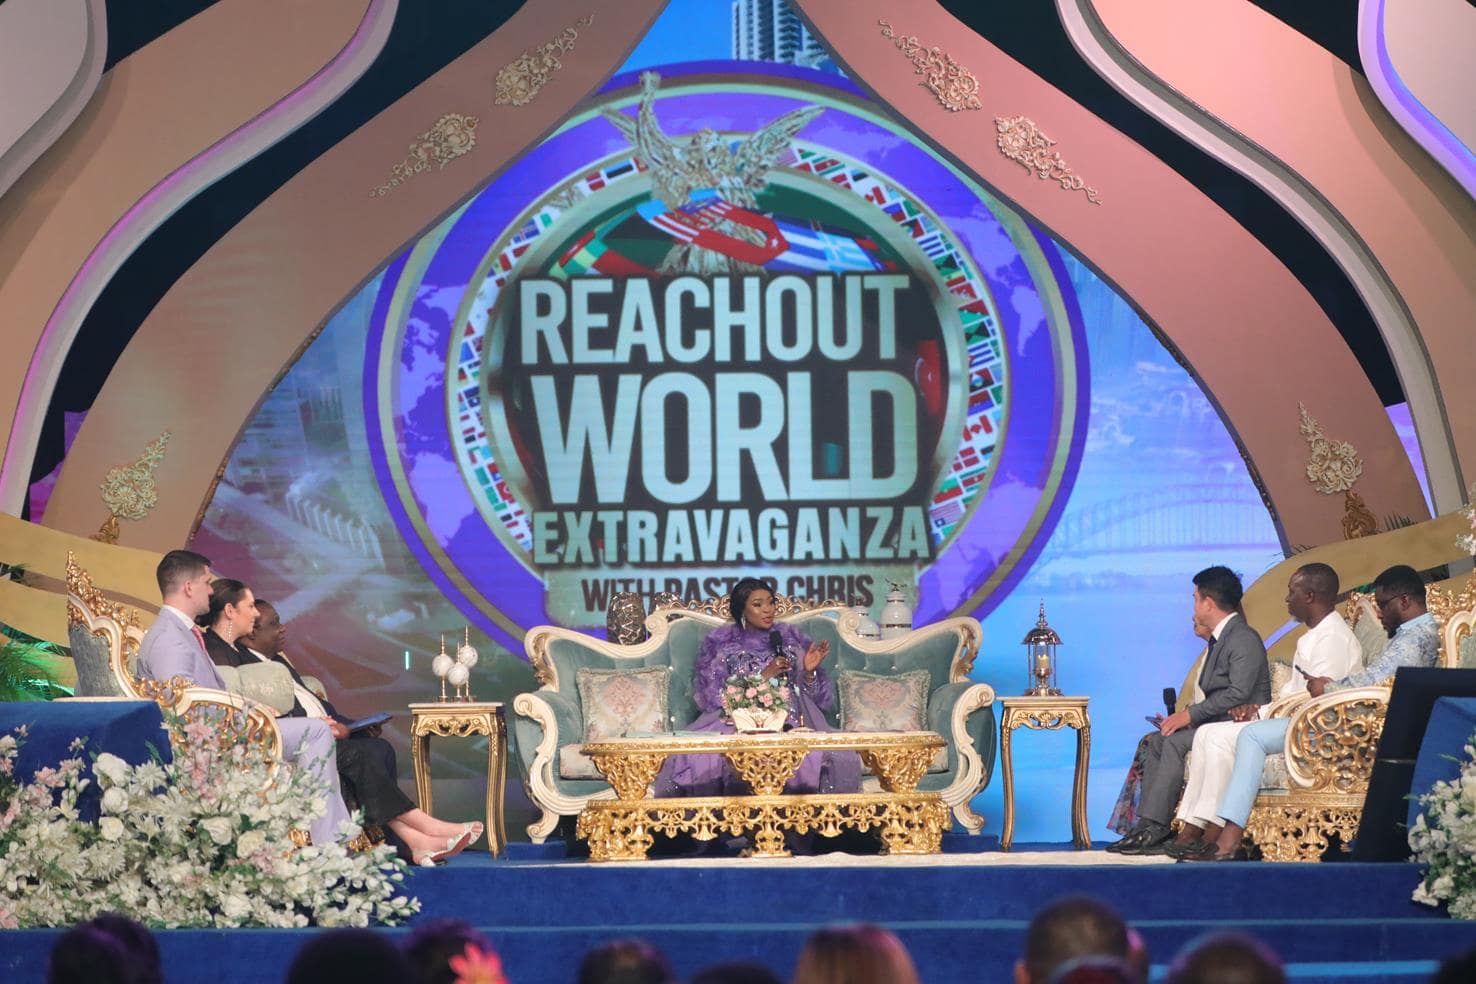 Reach Out World Extravaganza with Pastor Chris